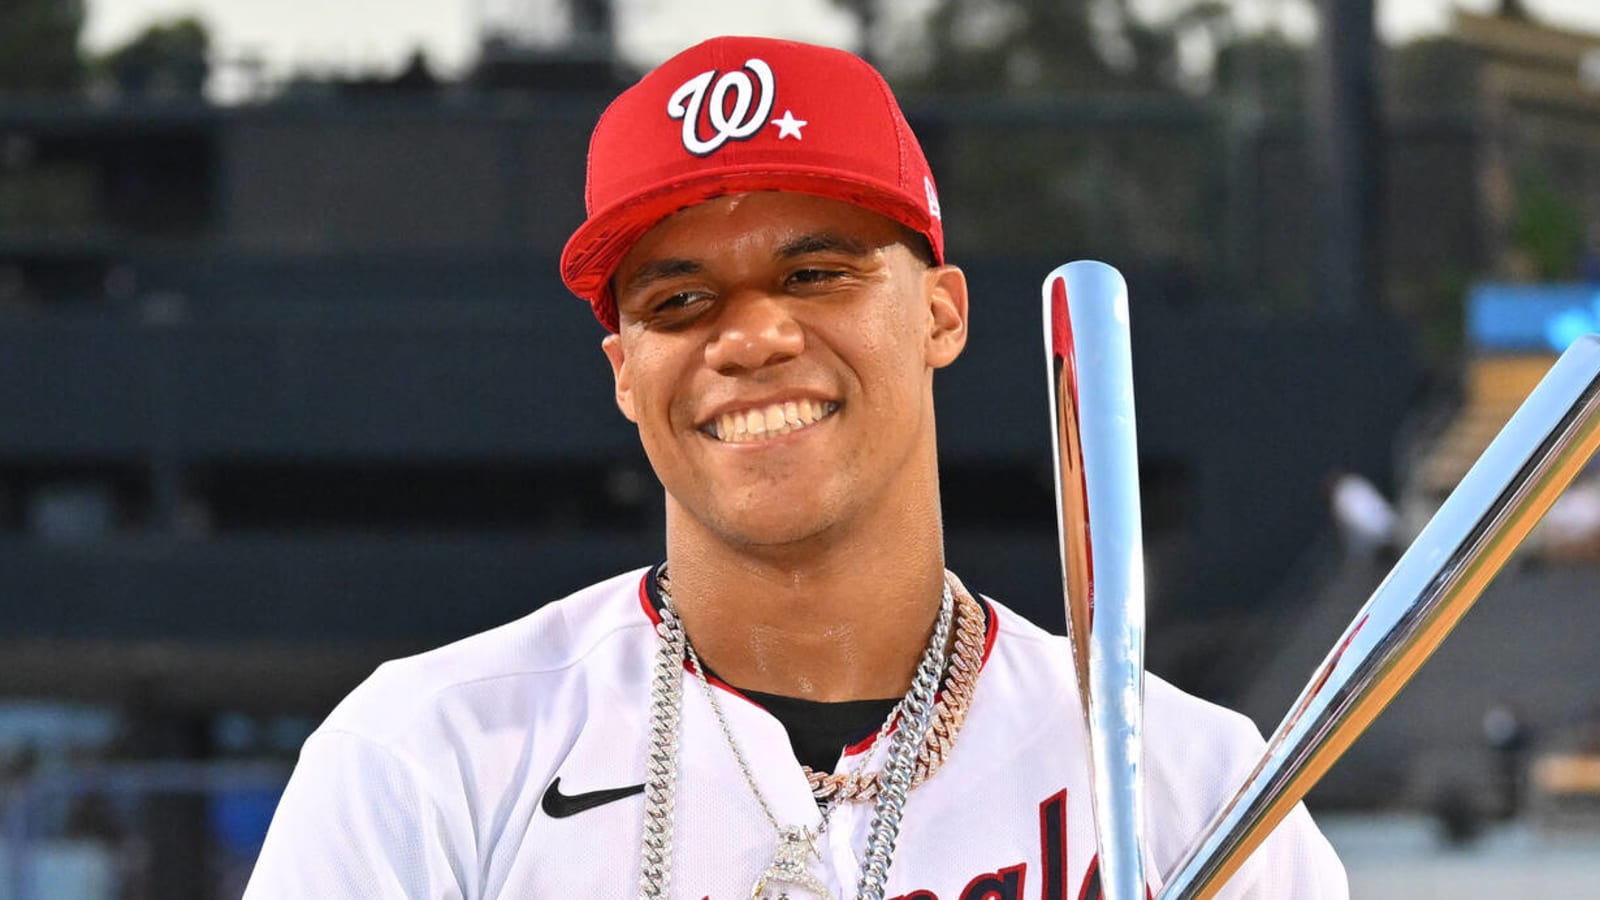 Braves snubbed Juan Soto travel request to avoid potential tampering allegations